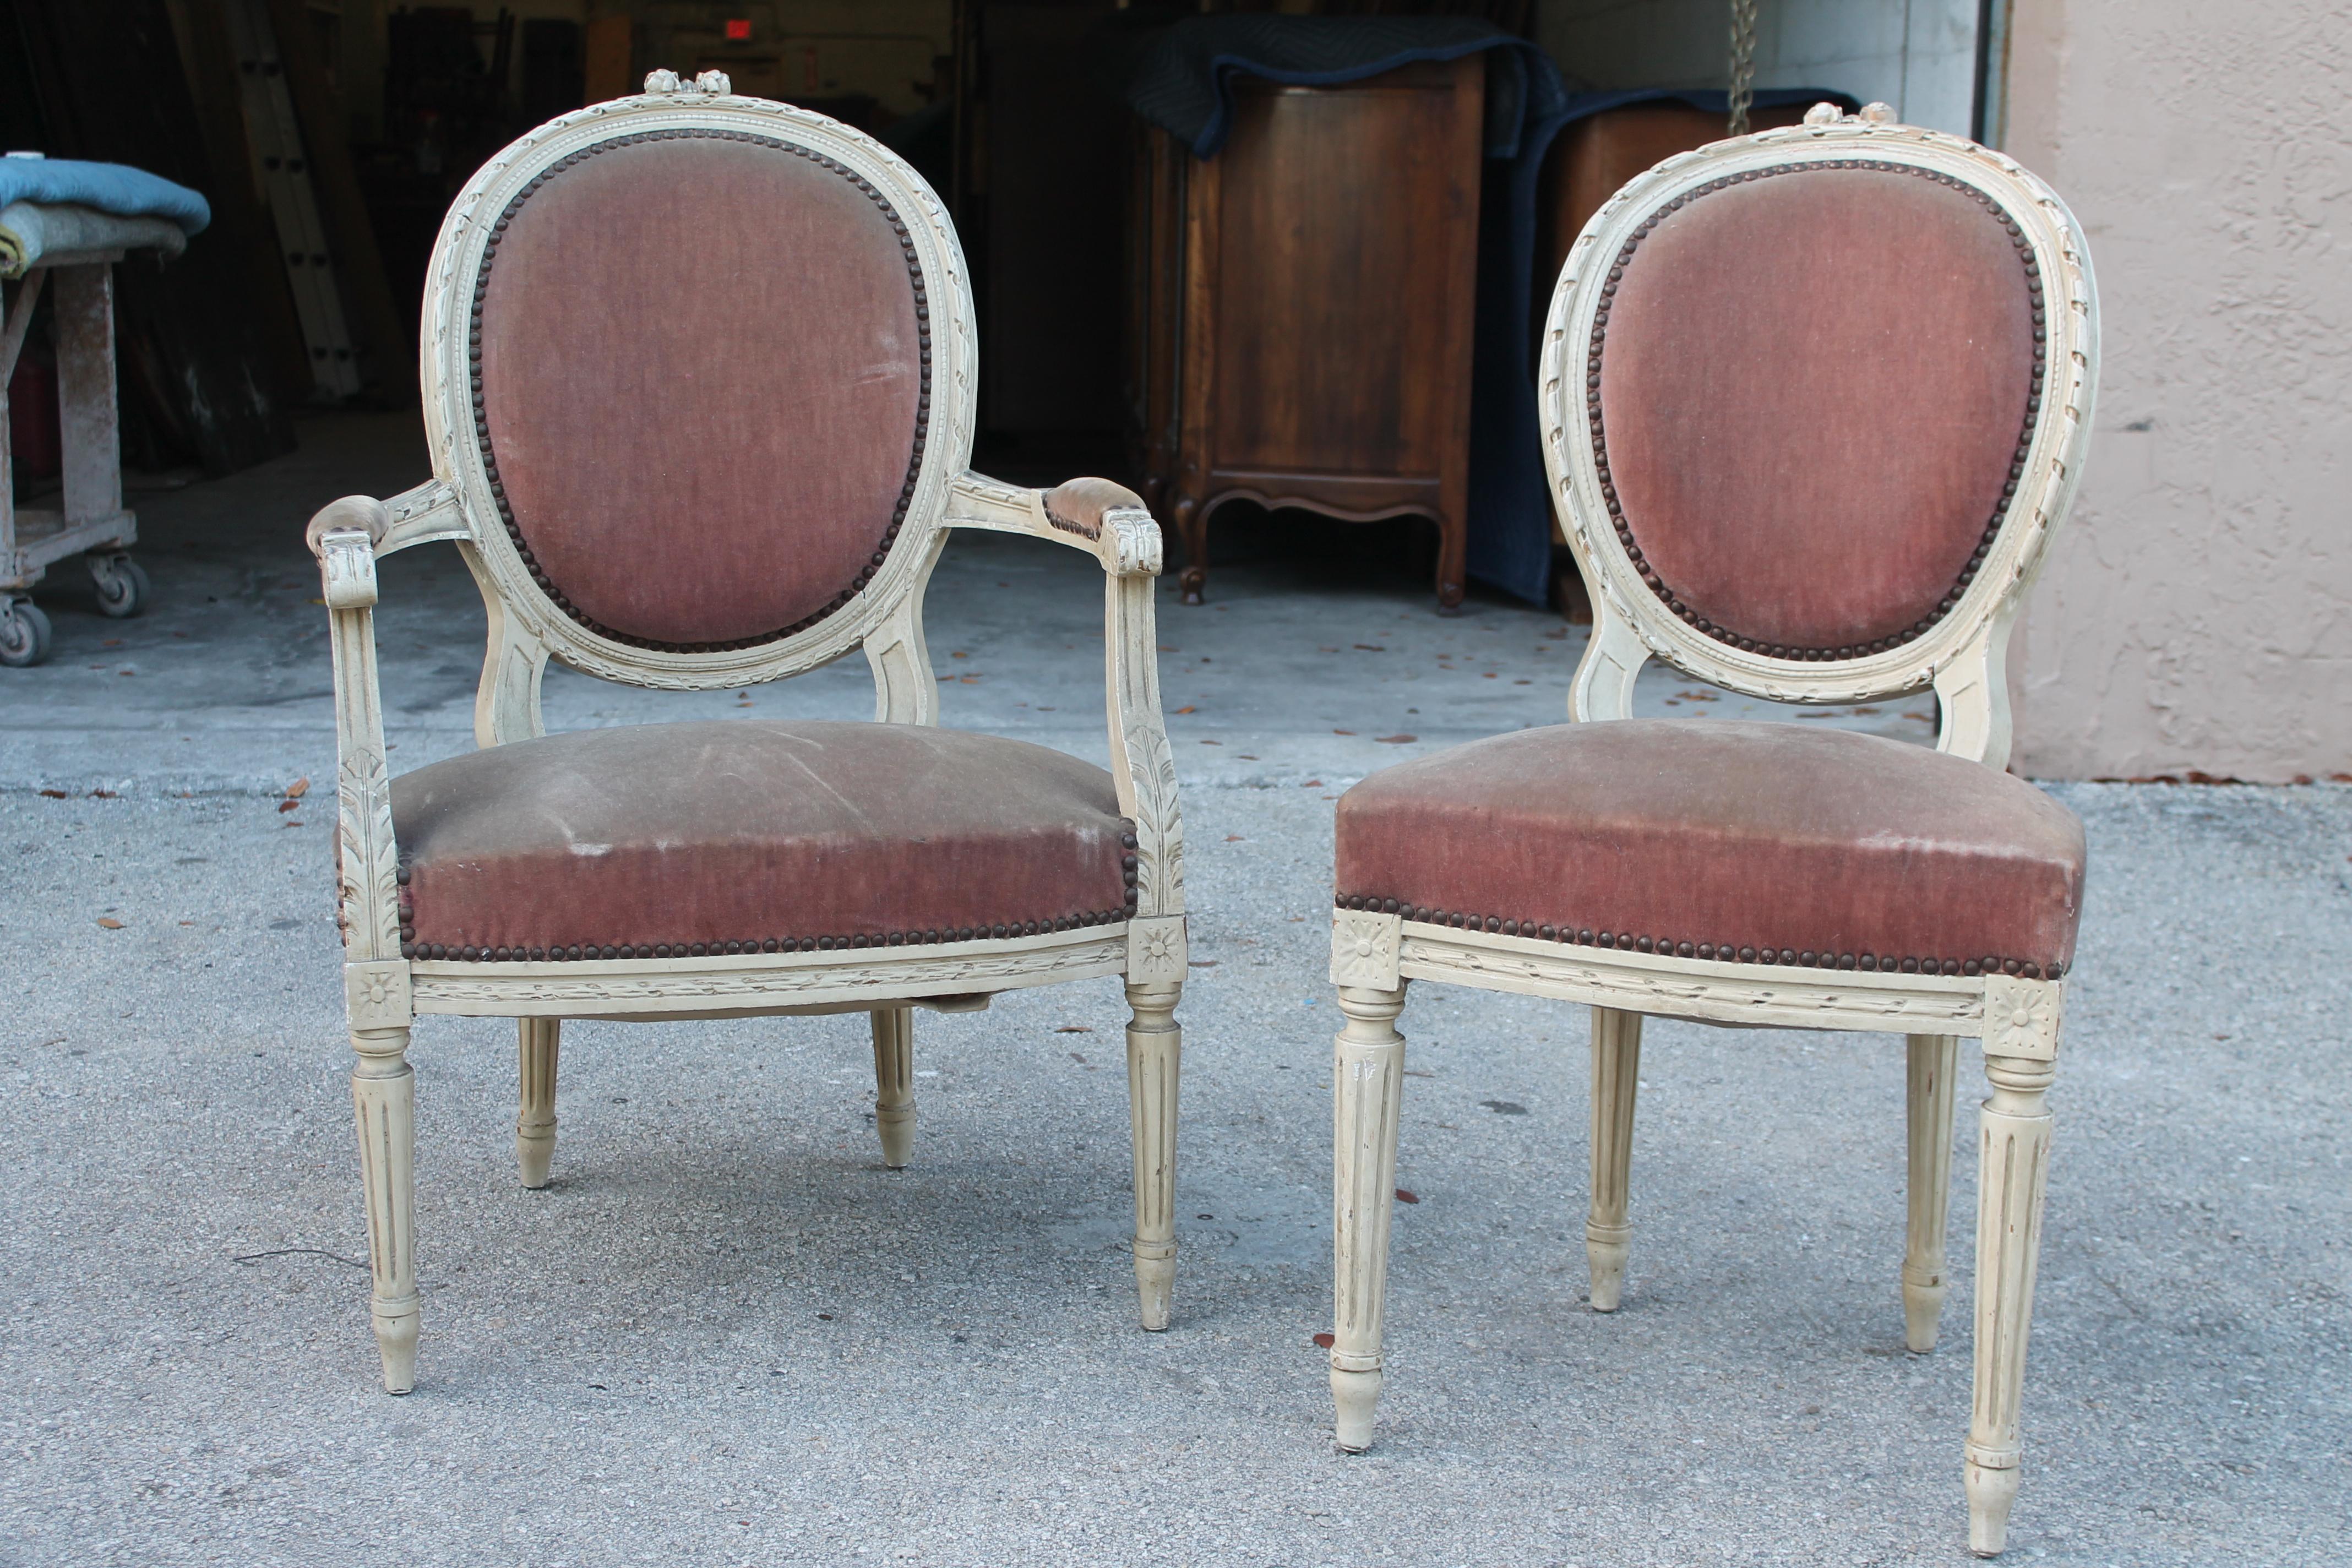  19thc French Louis XVI Arm Chair and Side Chair [2 piece] For Sale 1